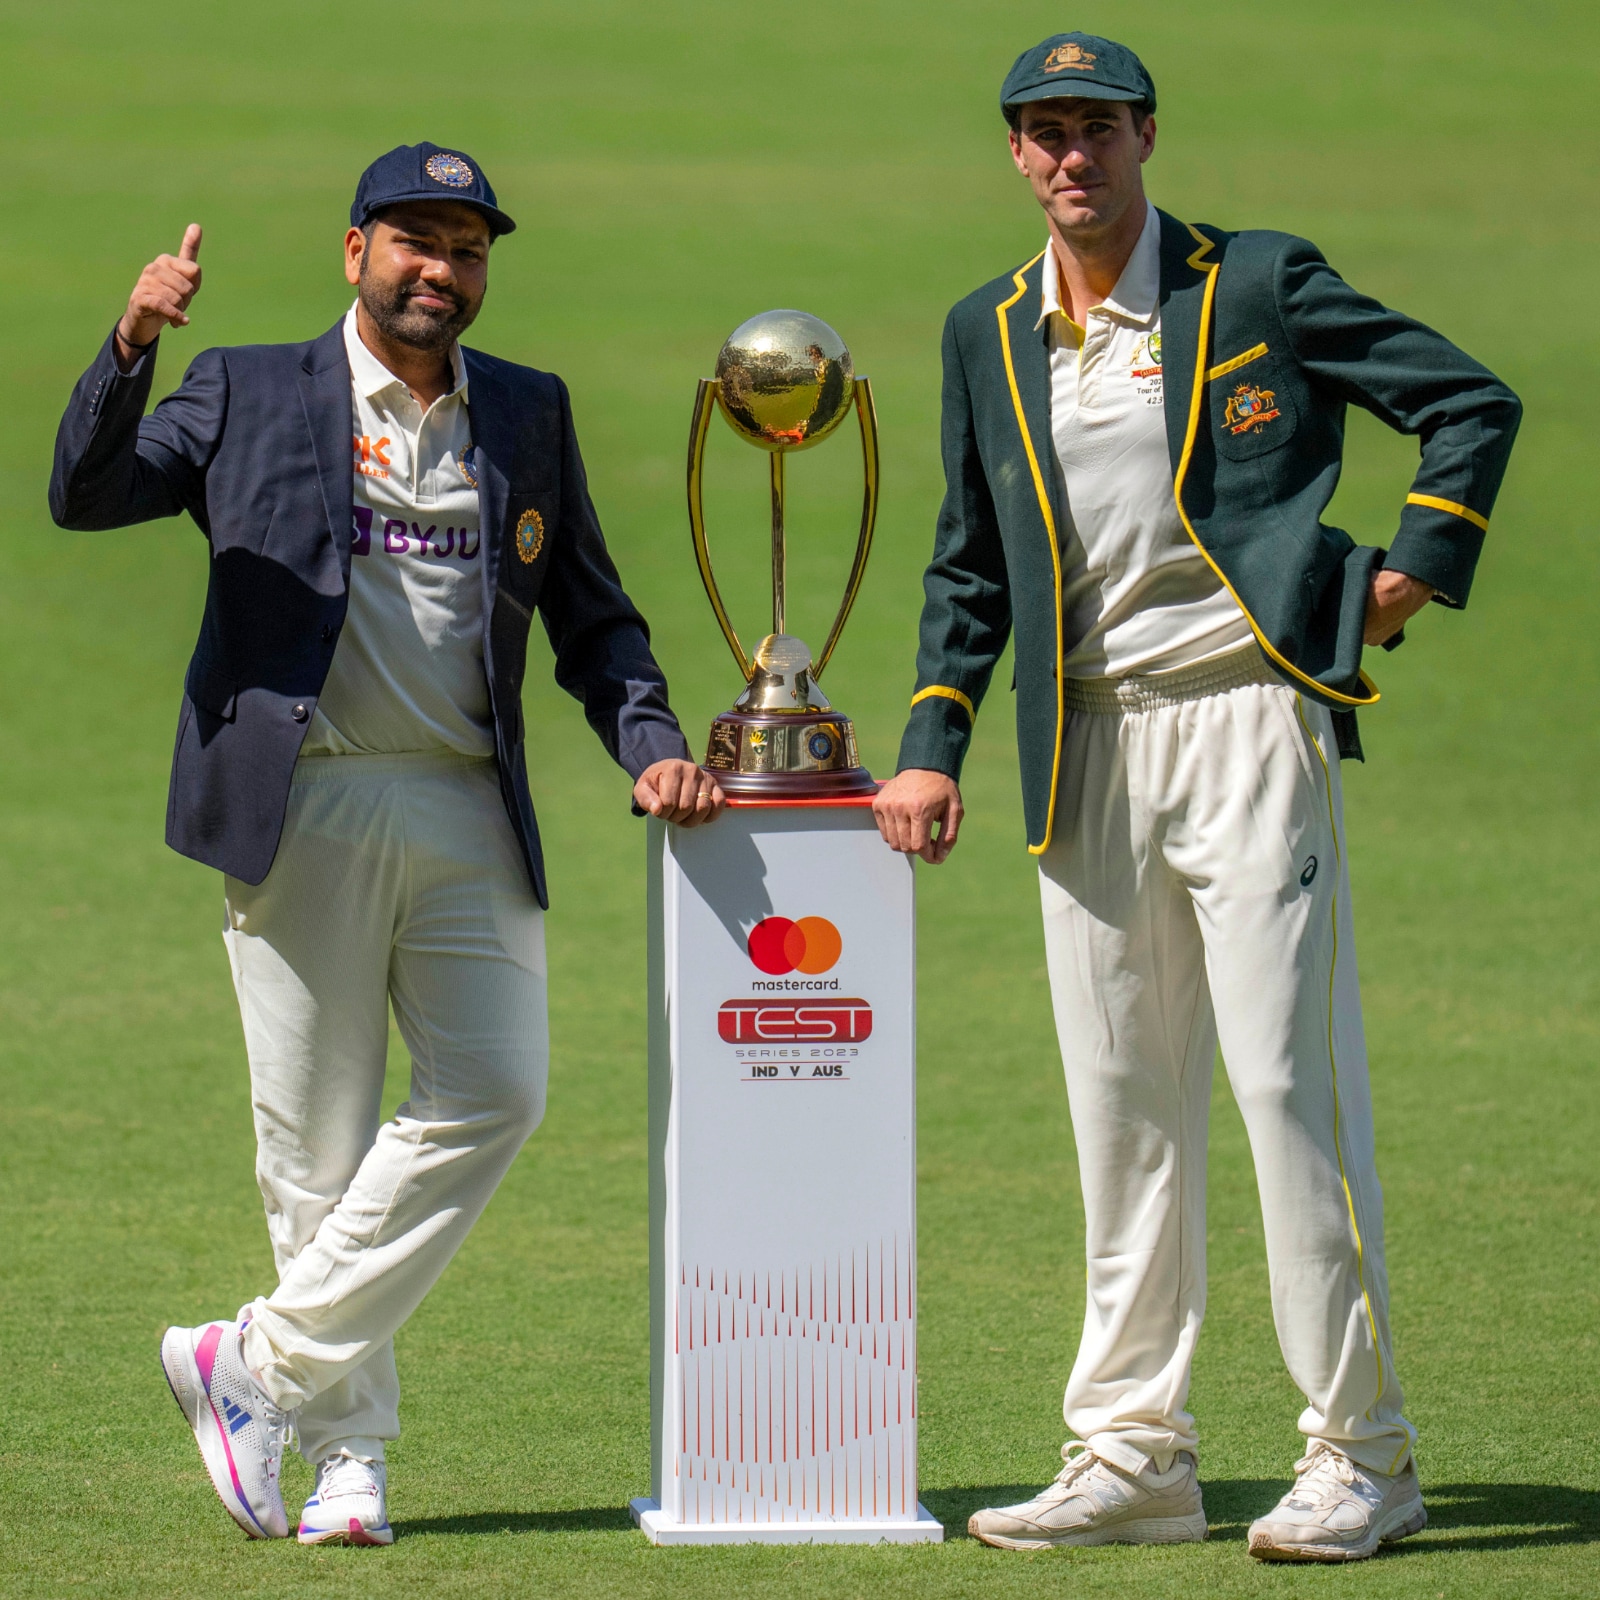 IND vs AUS, 1st Test: Near Sold Out Crowd Expected for Series Opener at Jamtha